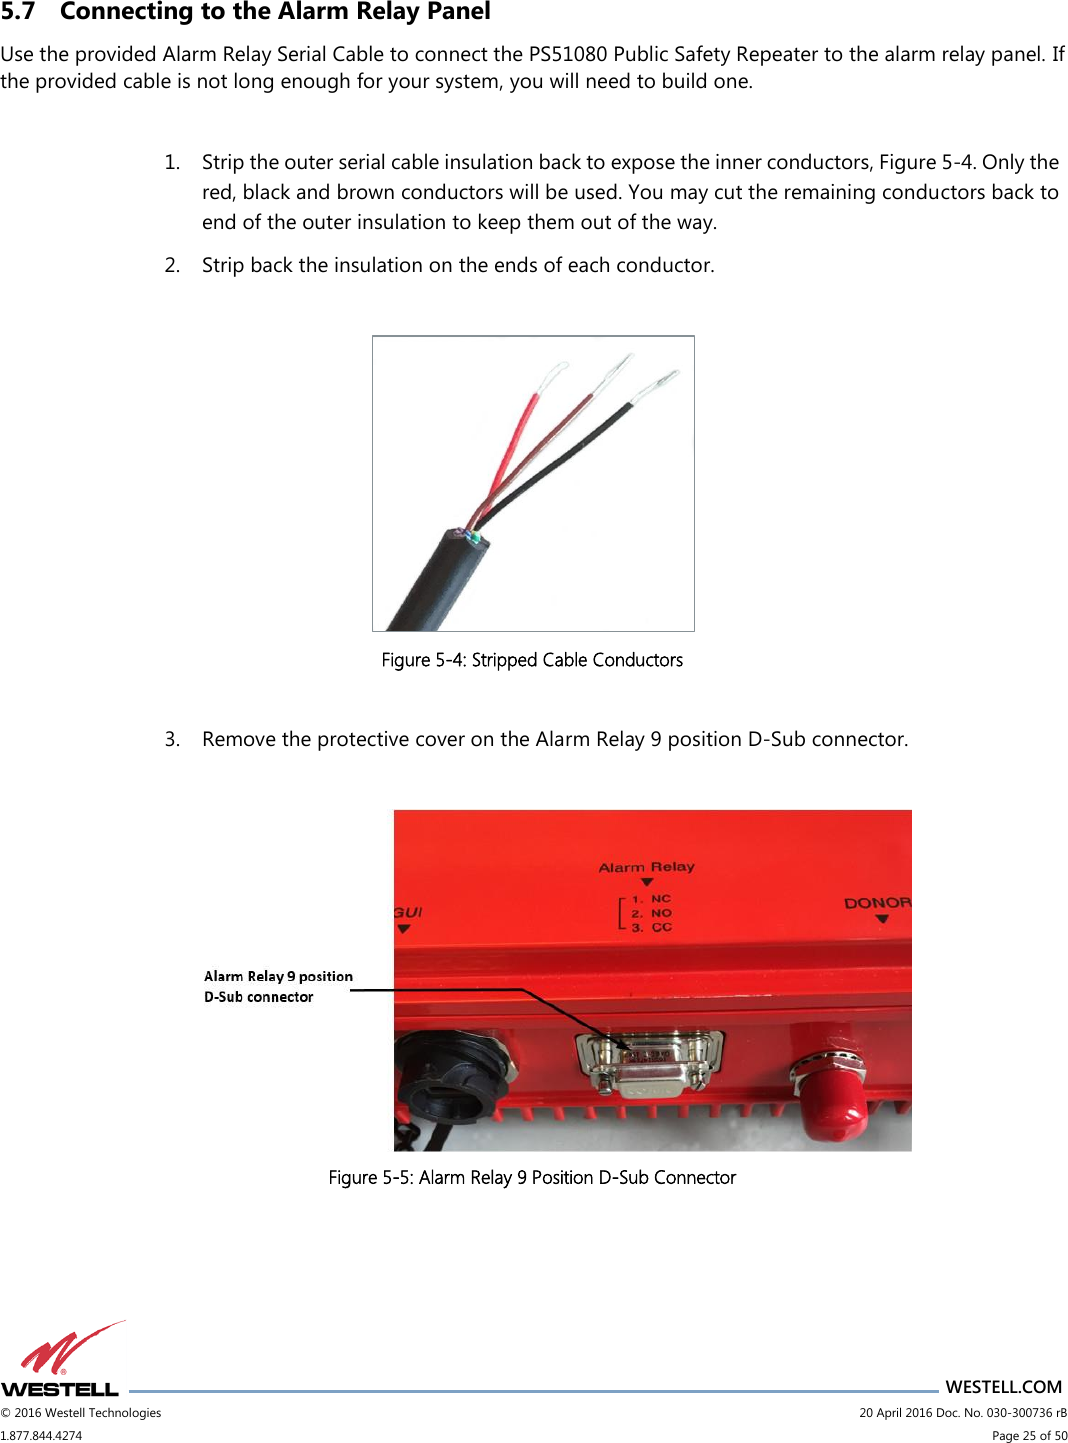                      WESTELL.COM © 2016 Westell Technologies                             20 April 2016 Doc. No. 030-300736 rB 1.877.844.4274                             Page 25 of 50  5.7 Connecting to the Alarm Relay Panel Use the provided Alarm Relay Serial Cable to connect the PS51080 Public Safety Repeater to the alarm relay panel. If the provided cable is not long enough for your system, you will need to build one.  1. Strip the outer serial cable insulation back to expose the inner conductors, Figure 5-4. Only the red, black and brown conductors will be used. You may cut the remaining conductors back to end of the outer insulation to keep them out of the way. 2. Strip back the insulation on the ends of each conductor.   Figure 5-4: Stripped Cable Conductors  3. Remove the protective cover on the Alarm Relay 9 position D-Sub connector.   Figure 5-5: Alarm Relay 9 Position D-Sub Connector     